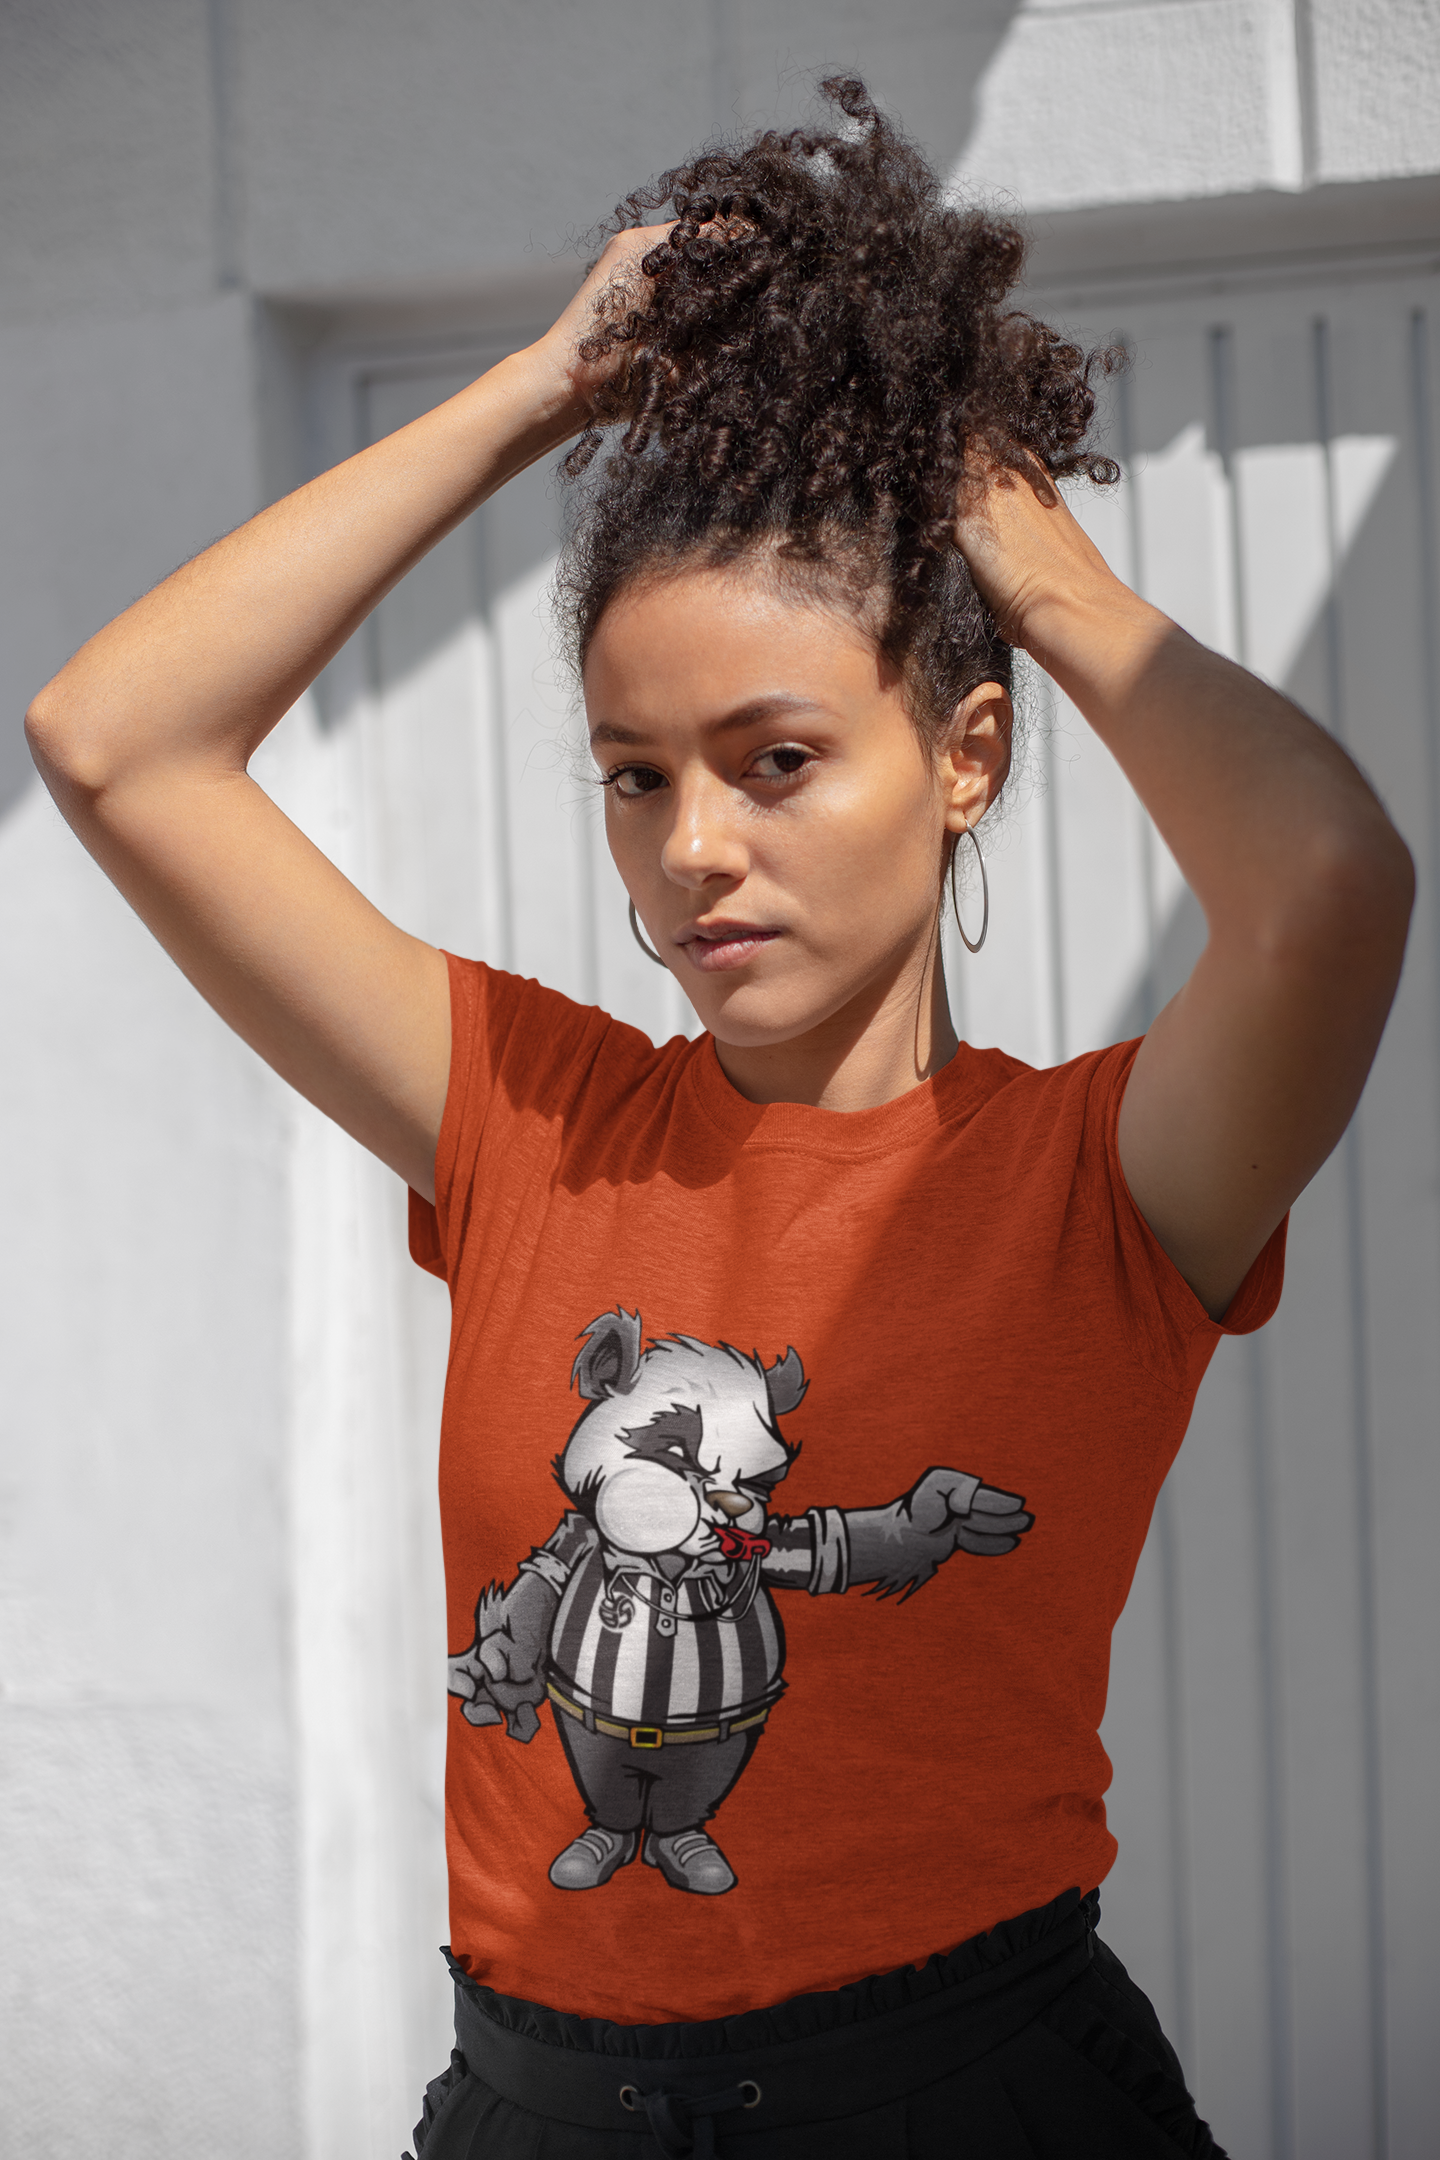 Before I officially introduce you to "Mo" the referee and star of the Volleybragswag panda t shirt, lets talk a bit more about the Giant Panda.